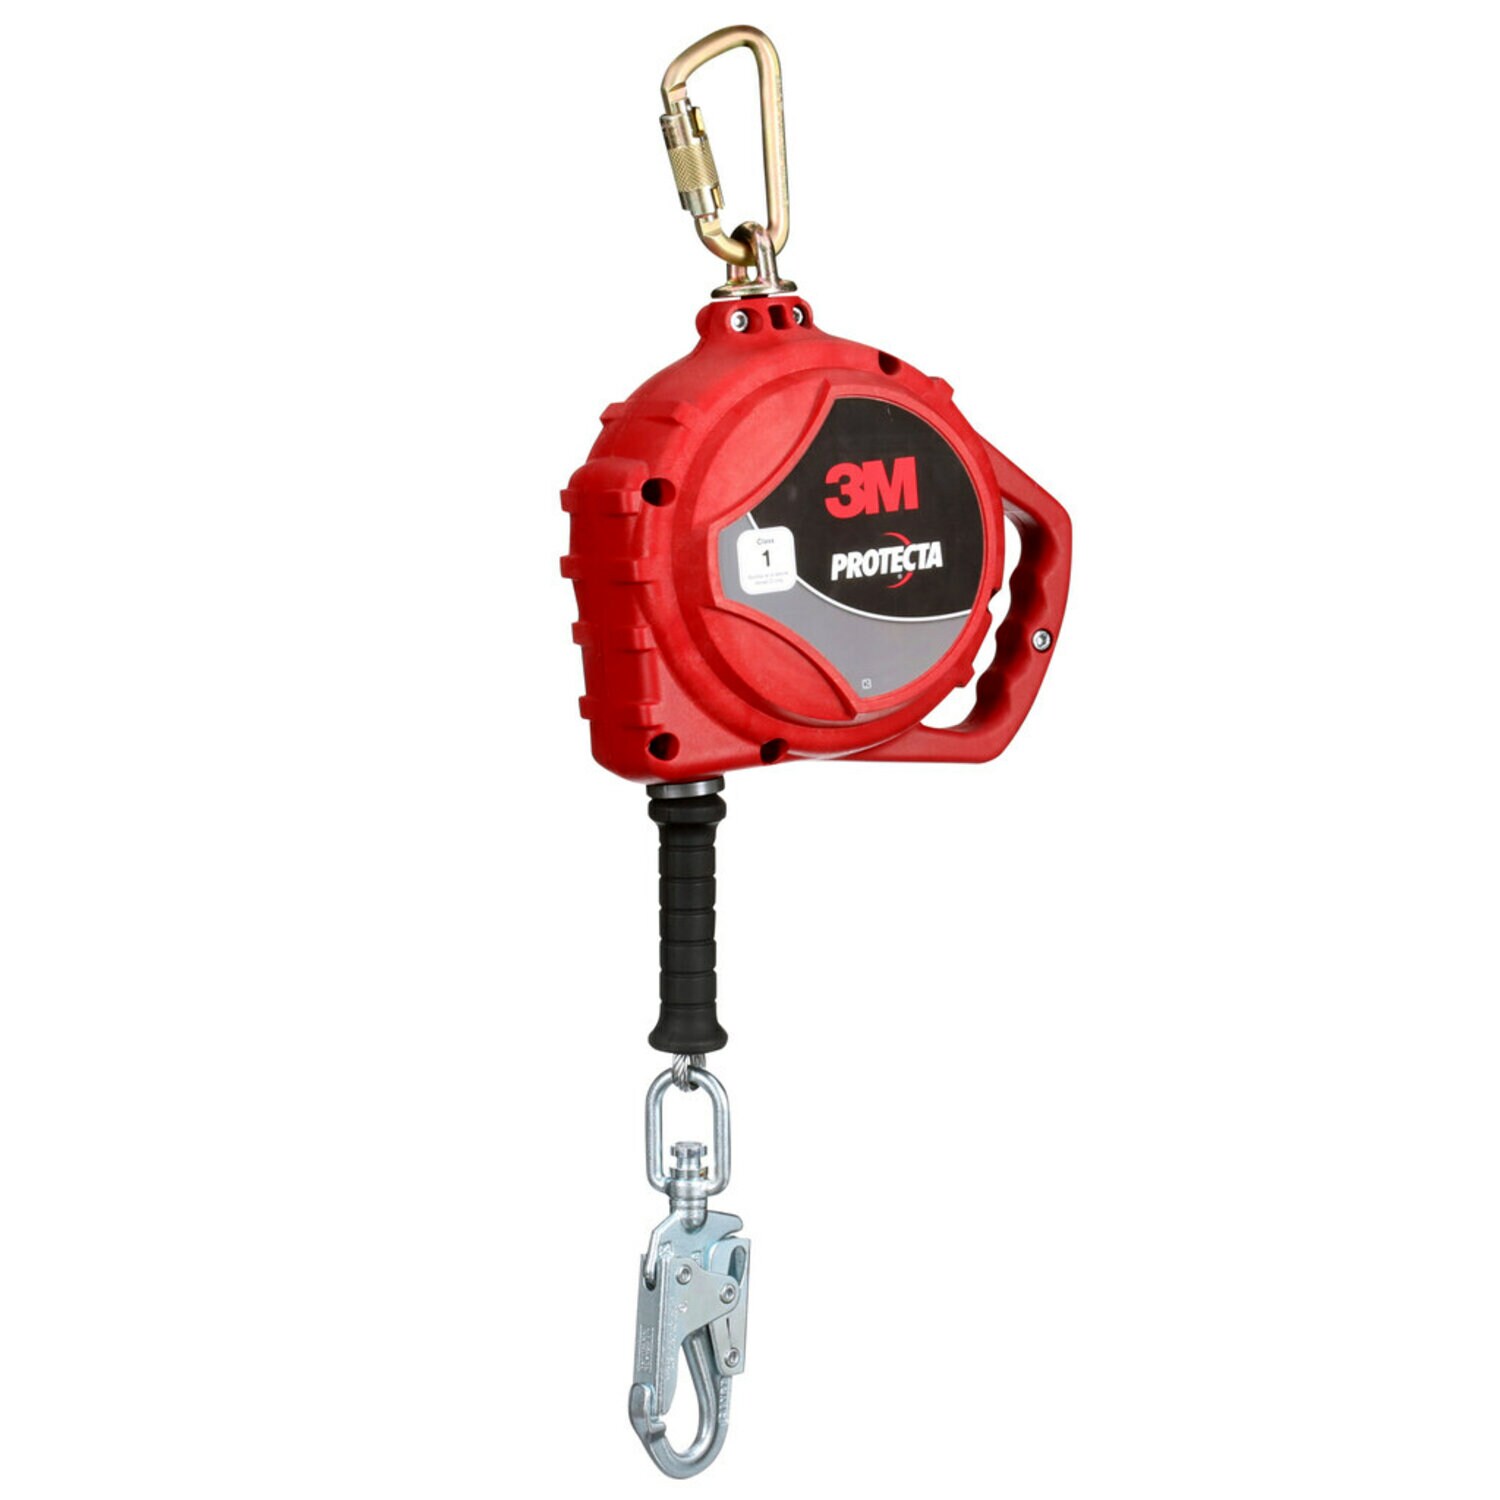 7100318437 - 3M Protecta Self-Retracting Lifeline 3590037, Stainless Steel Cable, Steel Swivel Snap Hook, 33ft., Class 1, ANSI